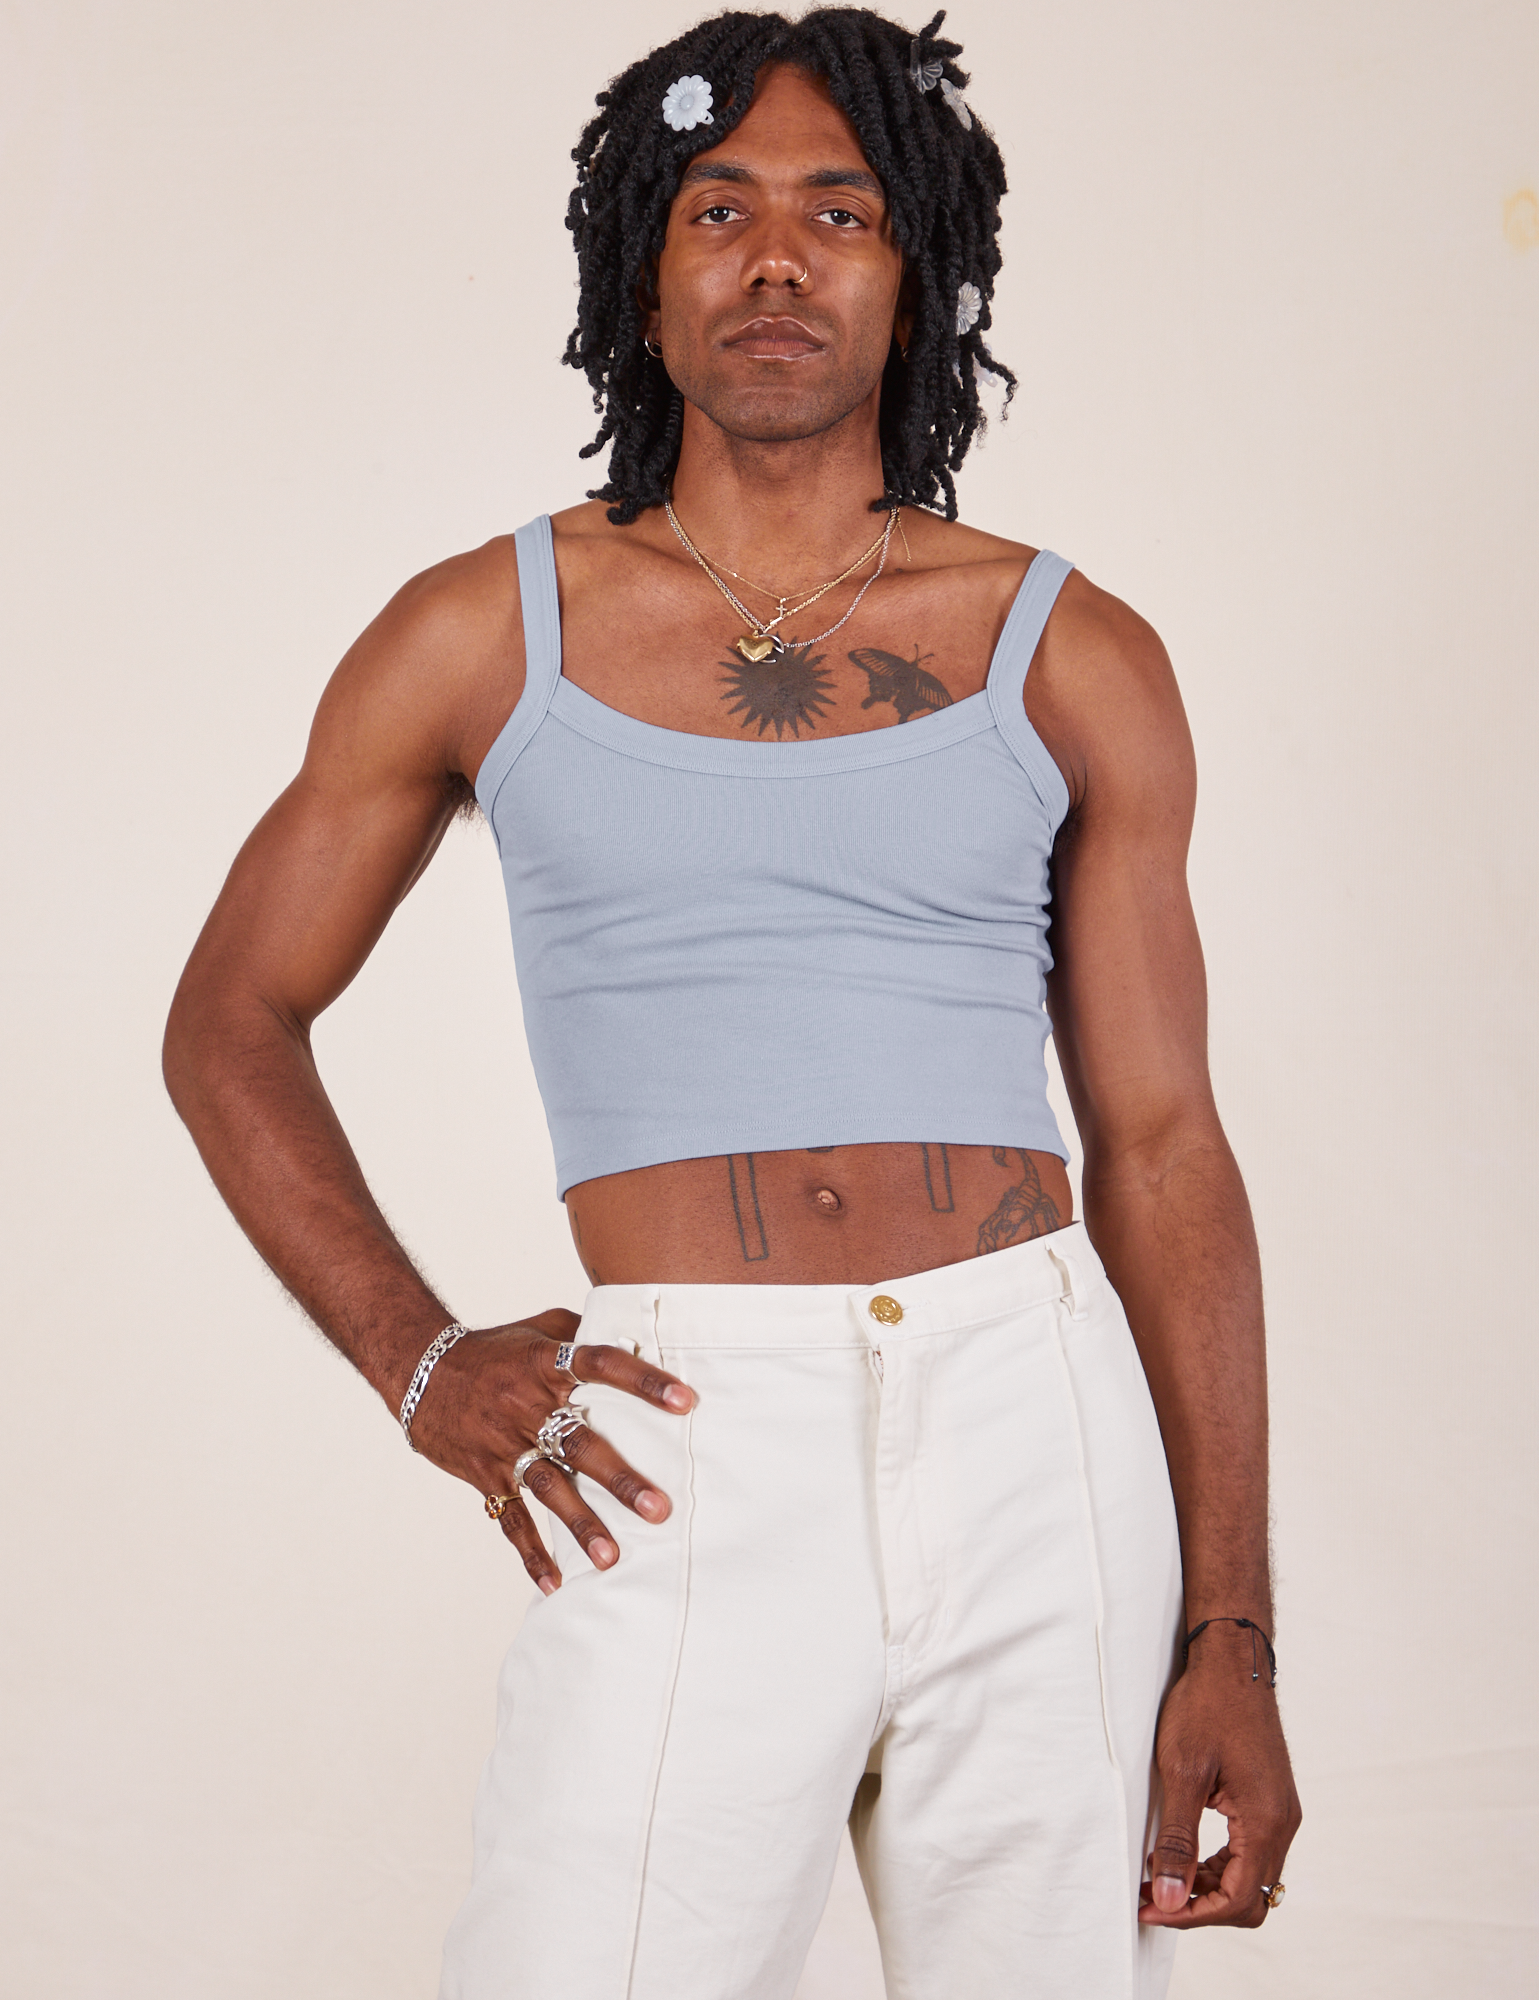 Jerrod is 6&#39;3&quot; and wearing S Cropped Cami in Periwinkle paired with vintage tee off-white Western pants